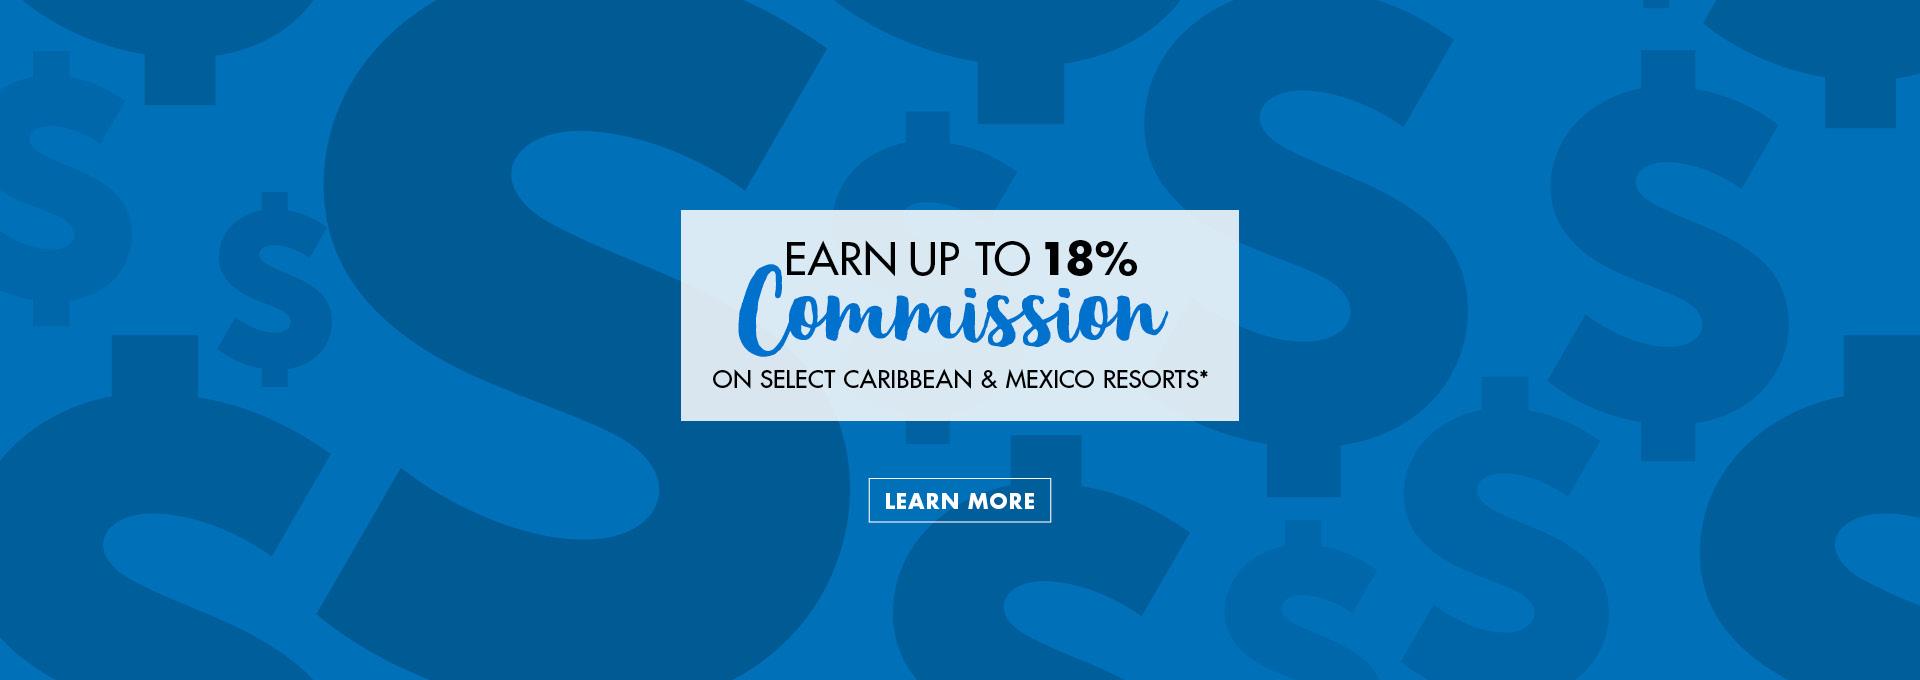 Earn up to 18% commission on select Caribbean and Mexico resorts